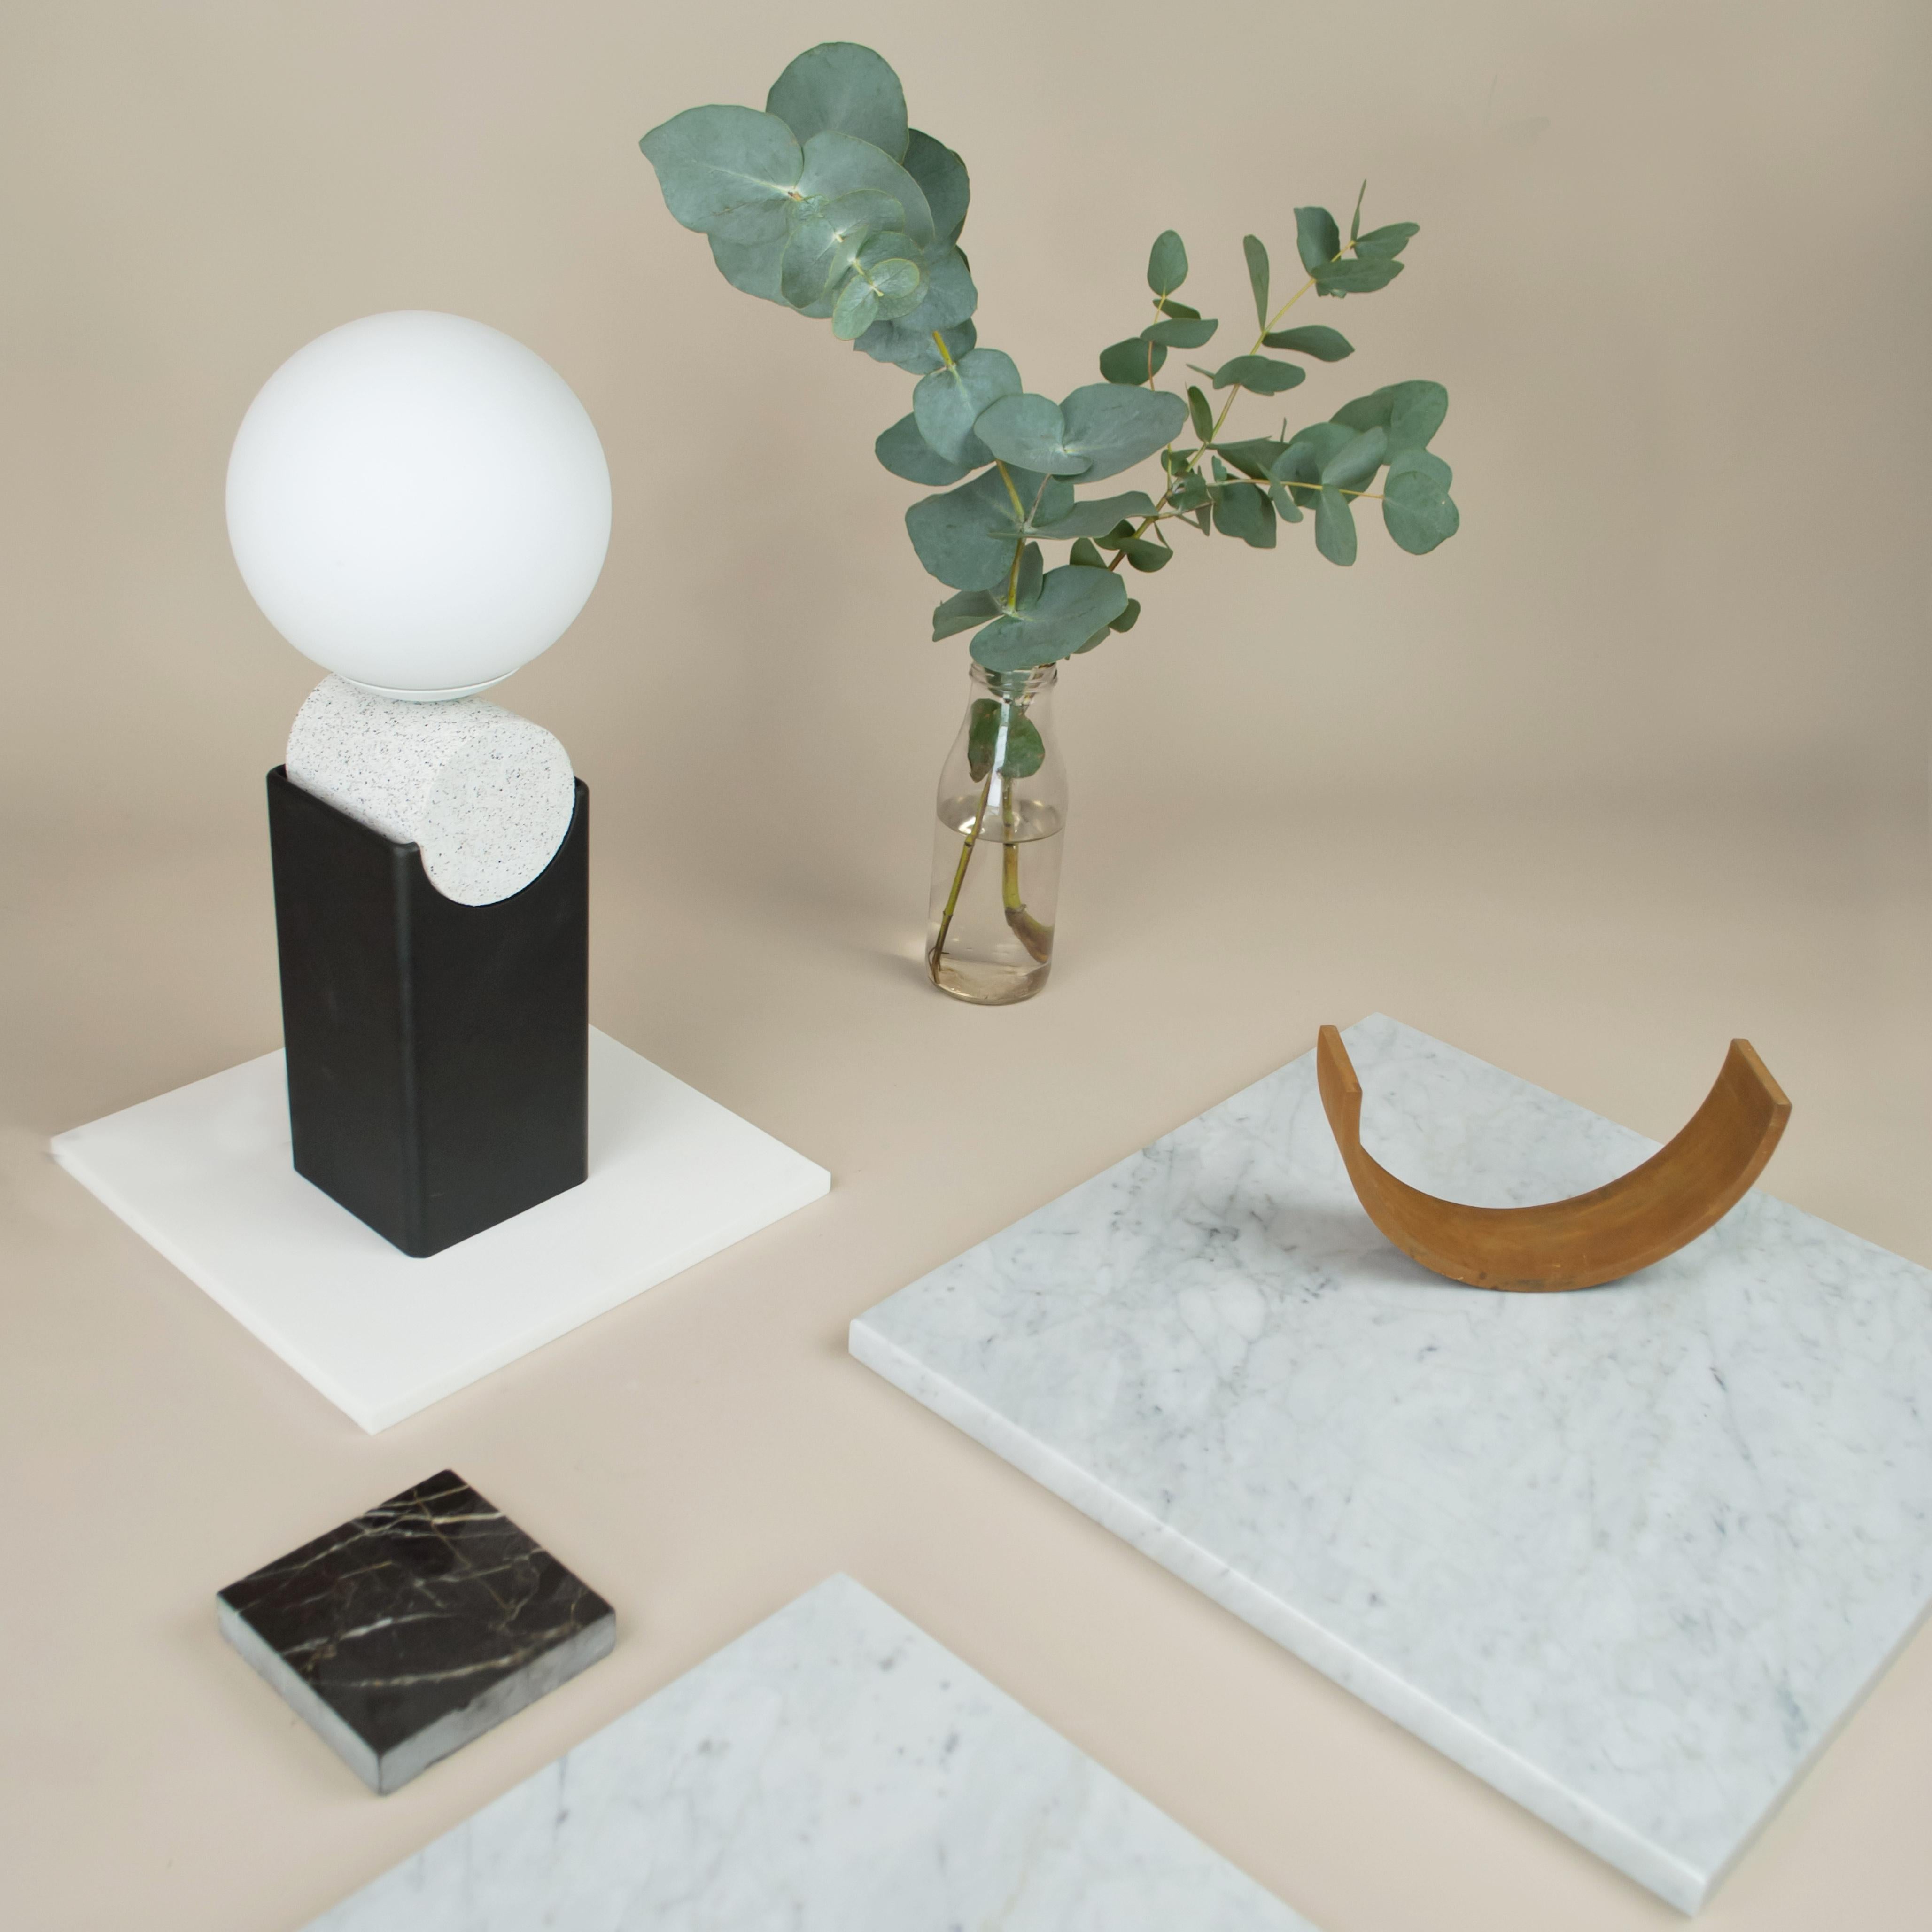 Monument Lamp - Circle Version 2 has a blackened steel base with a cast stone cylinder and a matte opal glass globe. 

The Monument Lamp V2 is handmade in Jobst’ studio in east London. Jobst’ research into historical monuments and their relationship